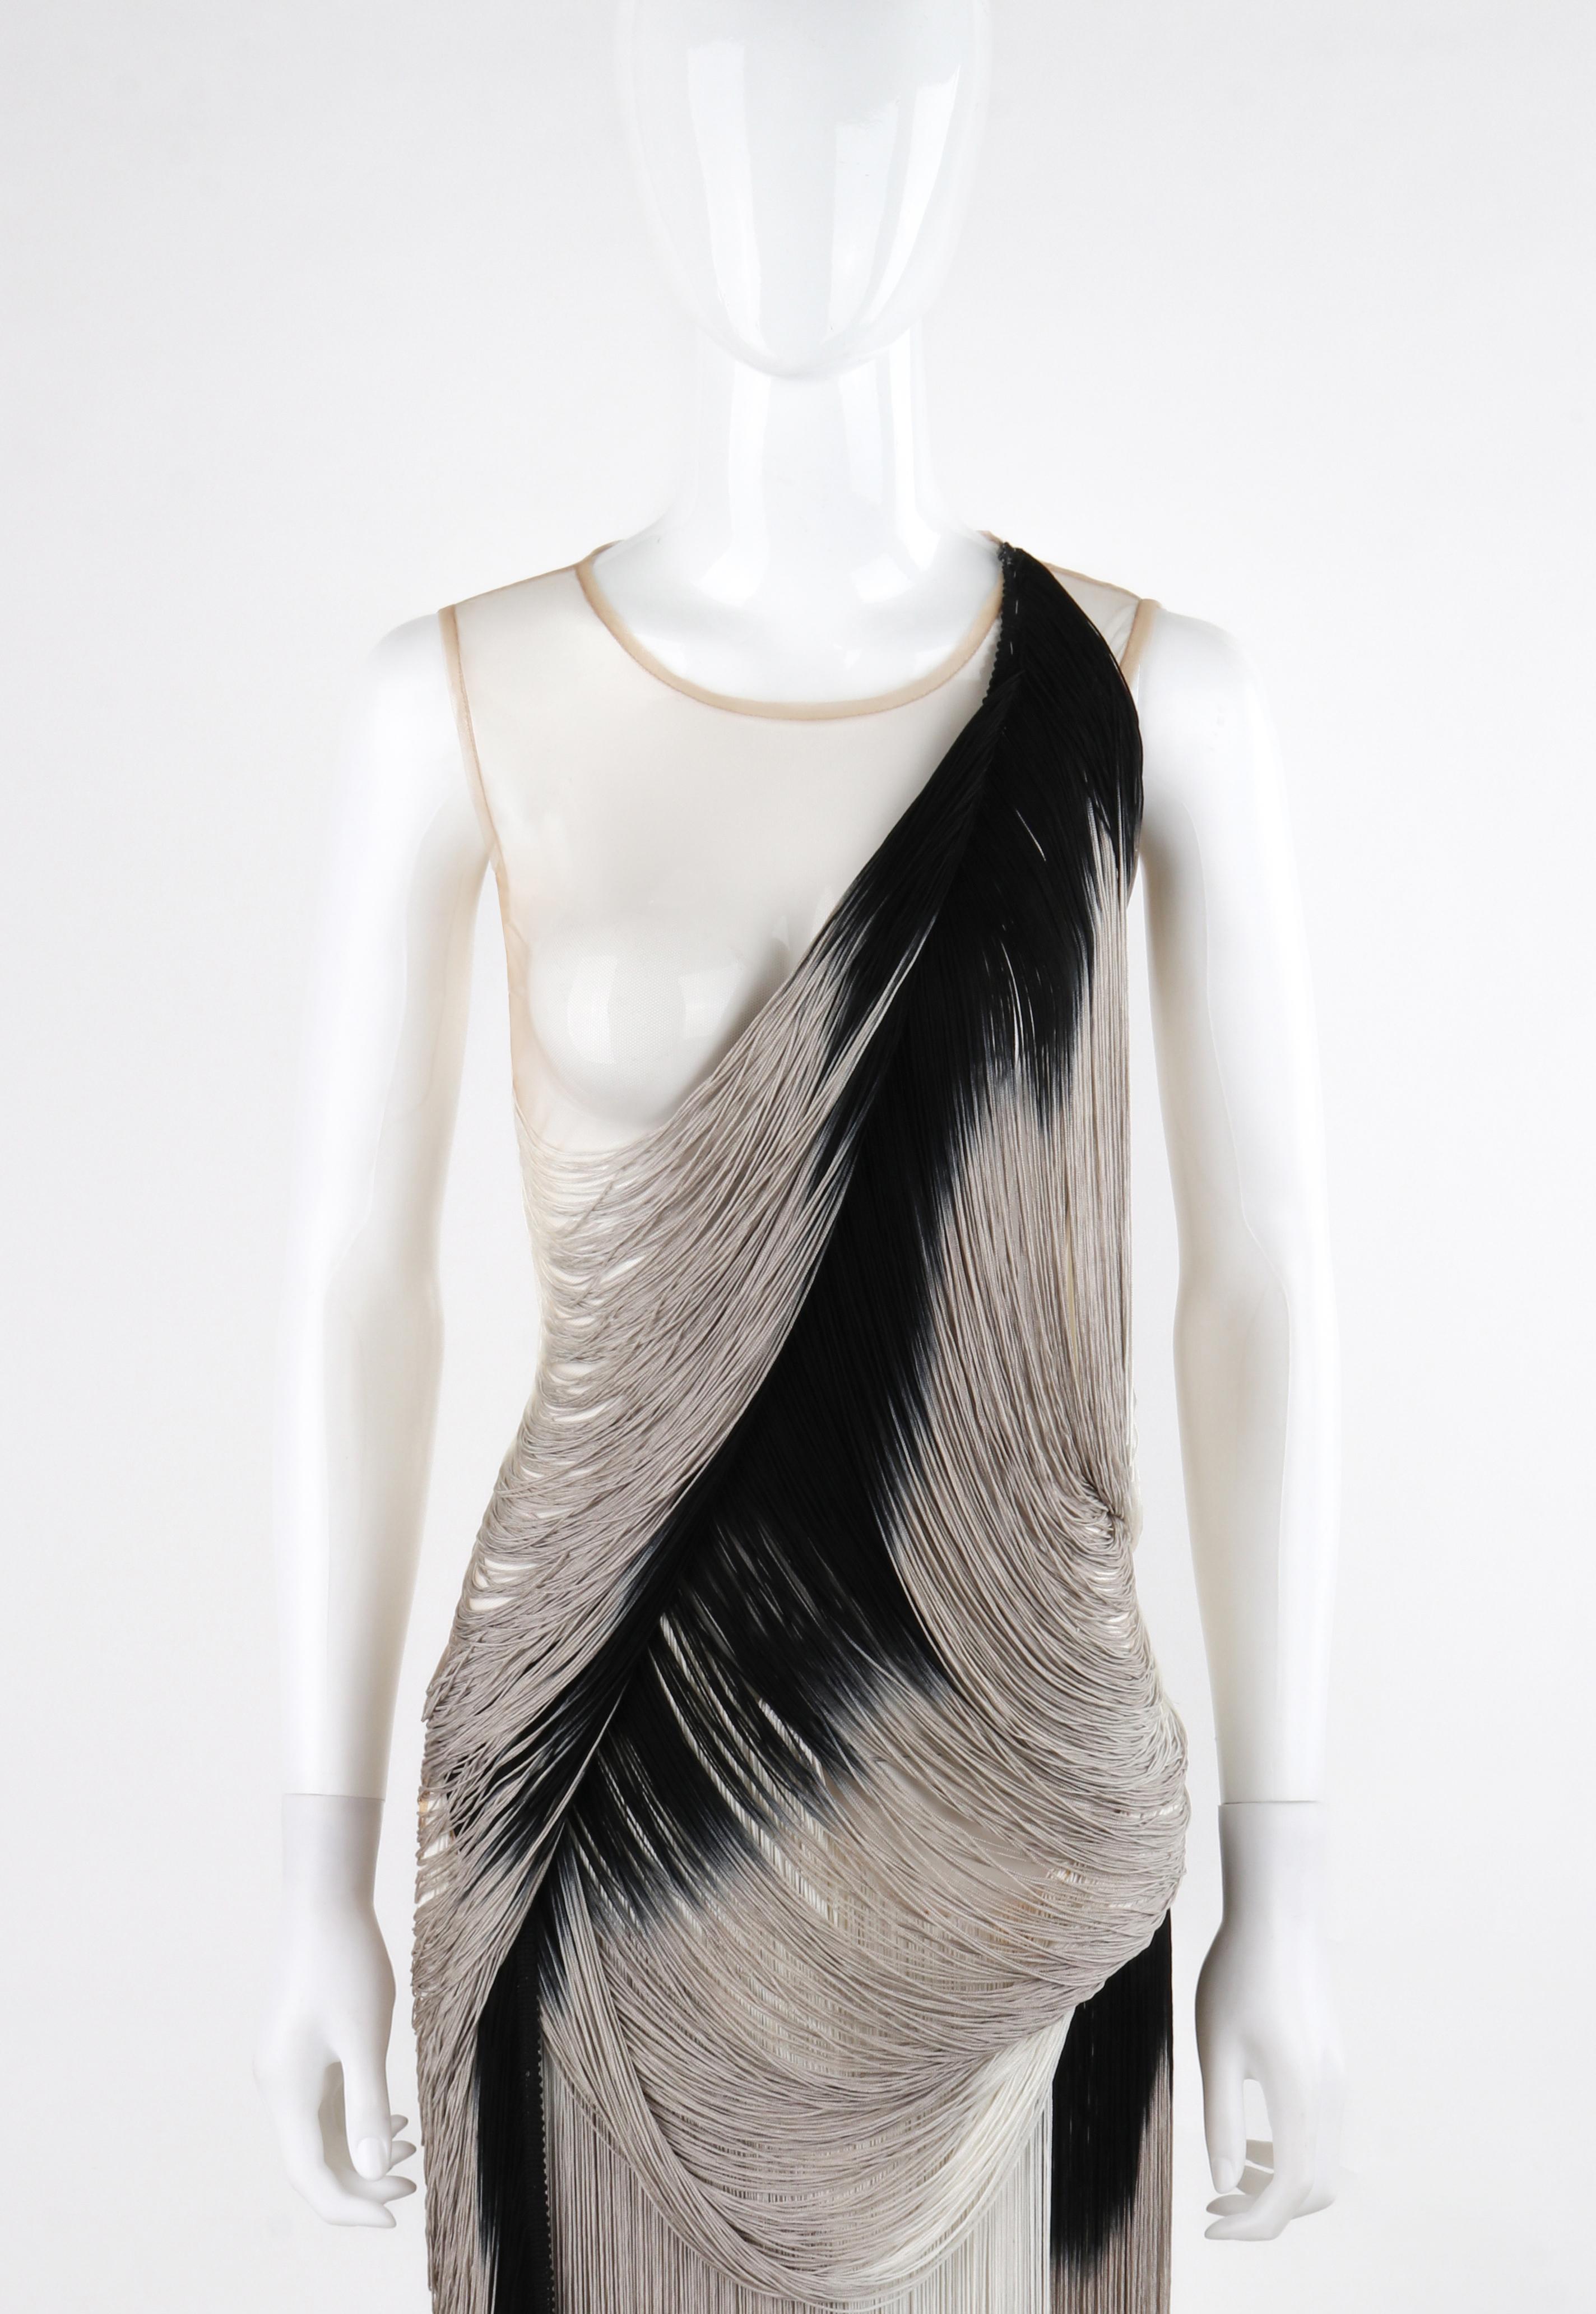 ALEXANDER McQUEEN S/S 2009 Black Gray Nude Mesh Tassel Fringe Draped Dress In Good Condition For Sale In Thiensville, WI